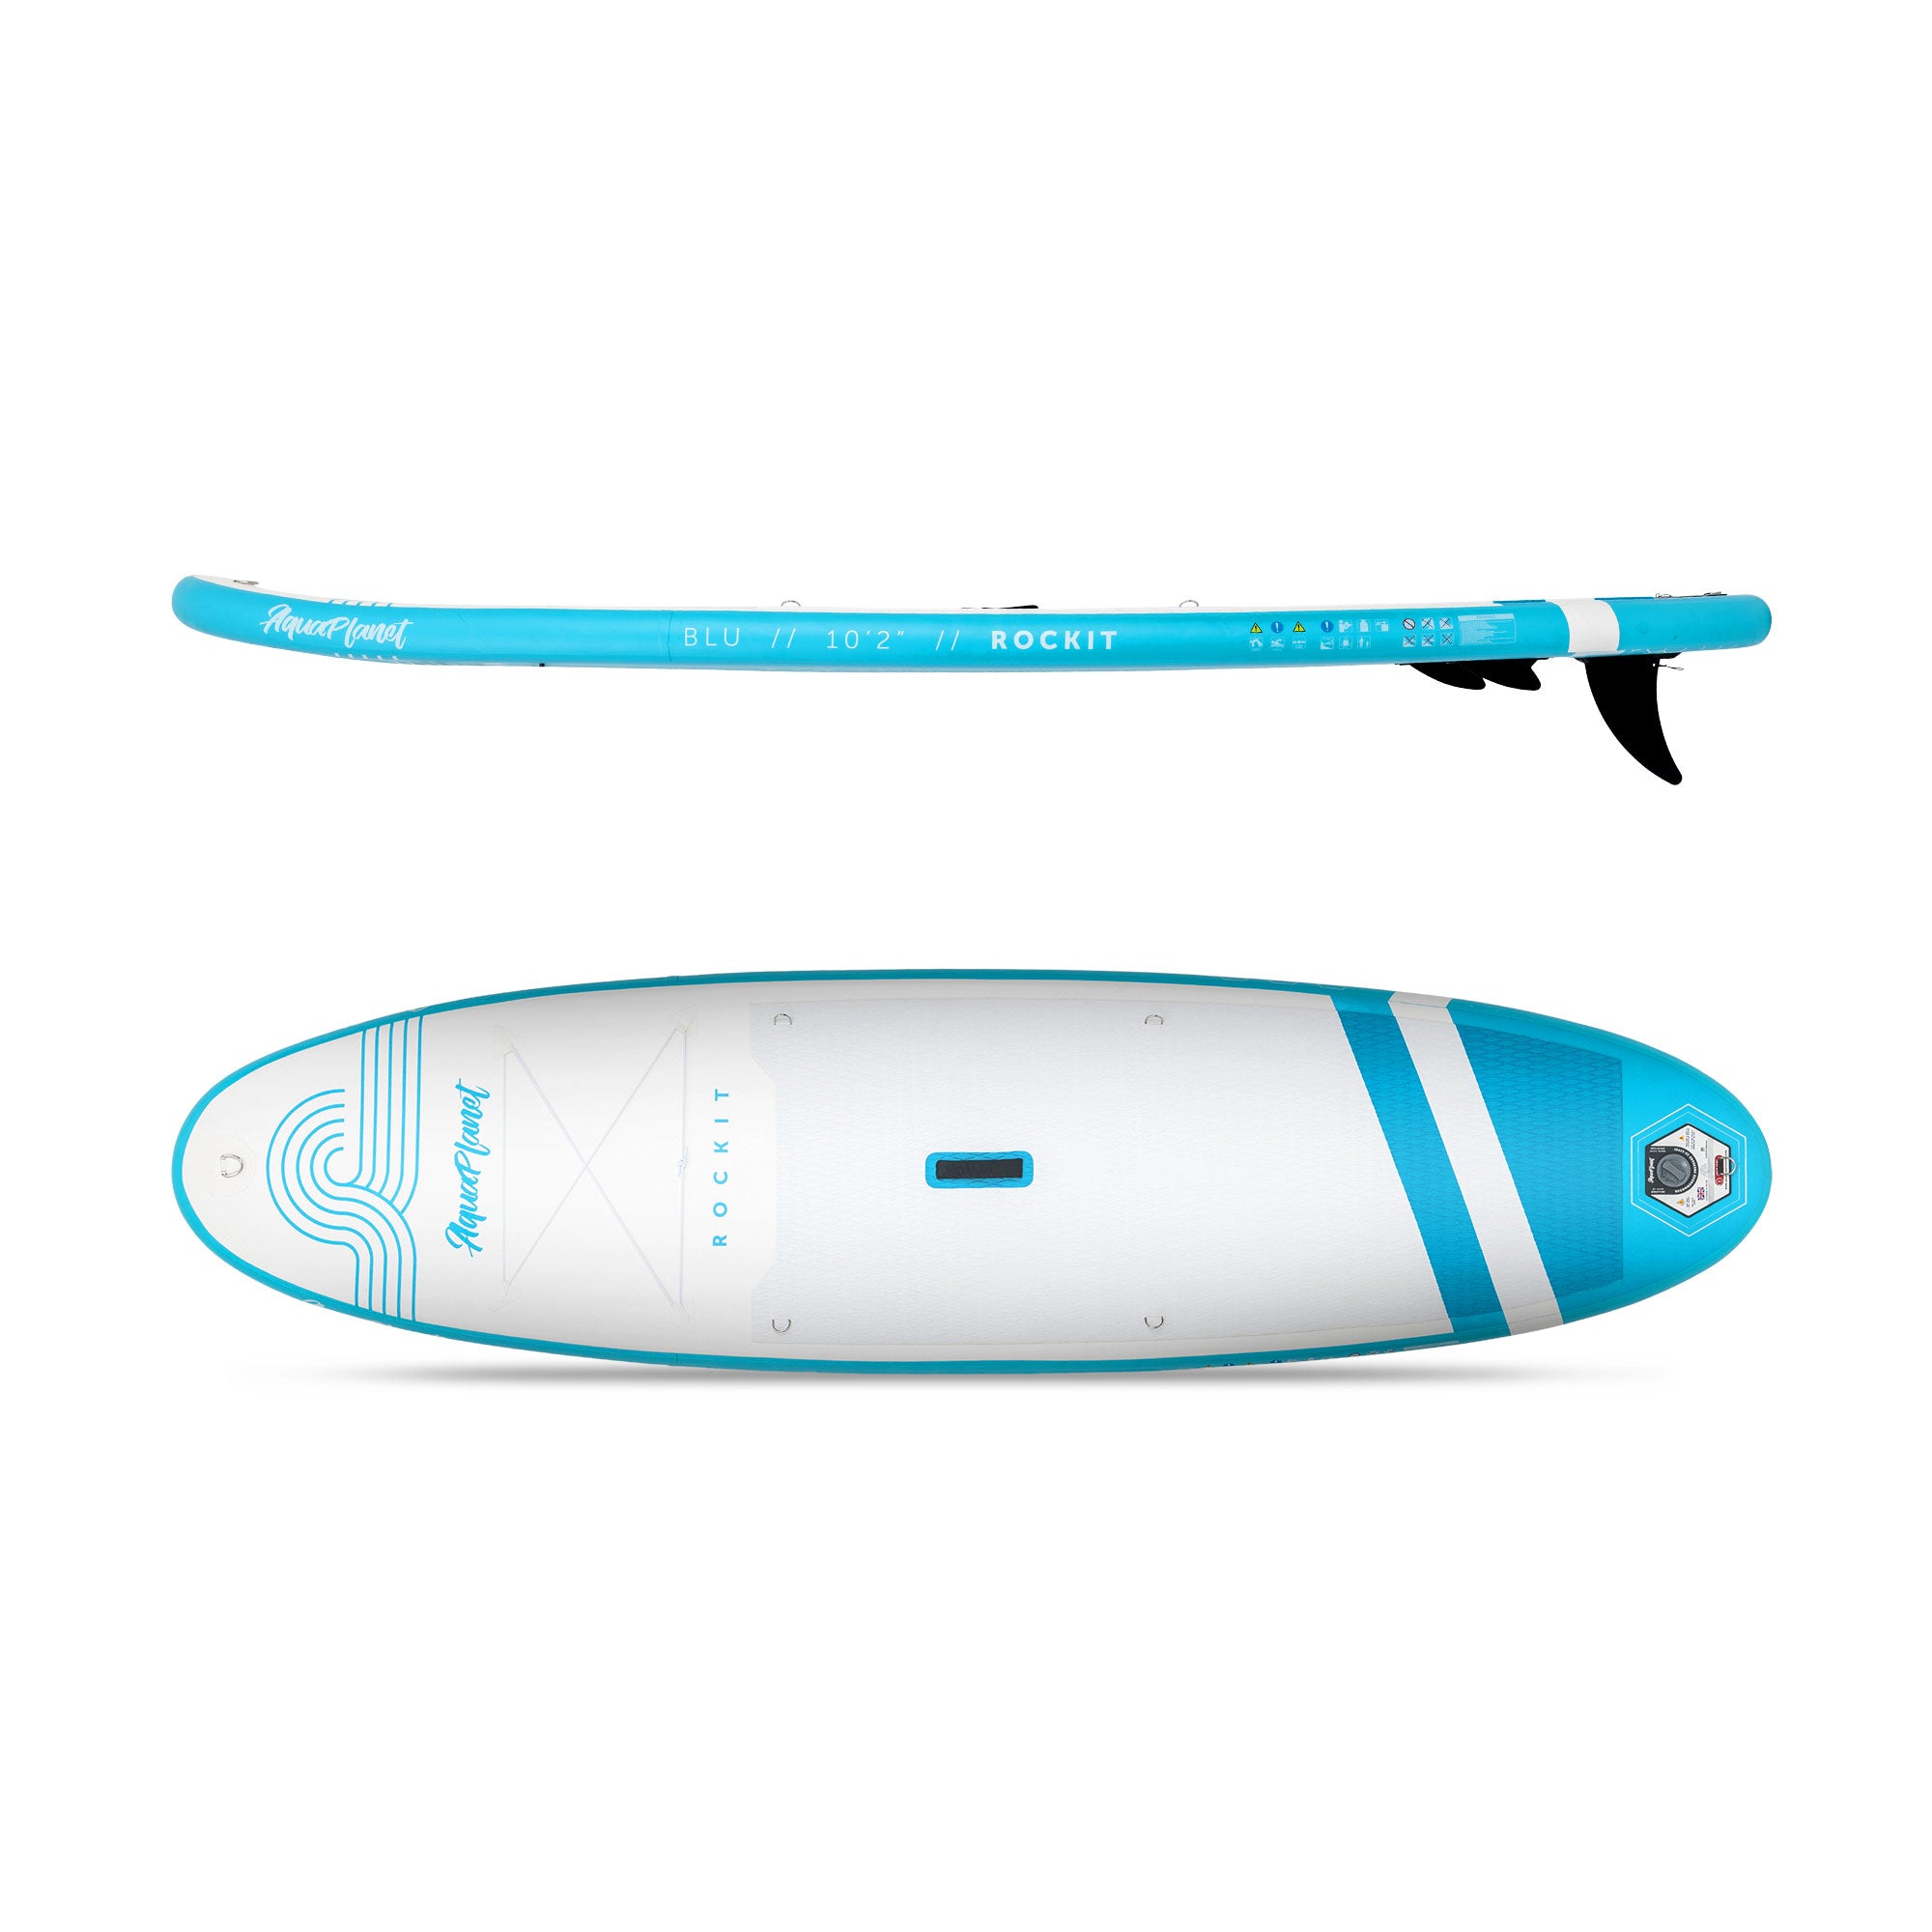 Top View and Side View of the Aquaplanet Rockit Blu 10'2" iSUP Inflatable Stand Up Paddleboard Set